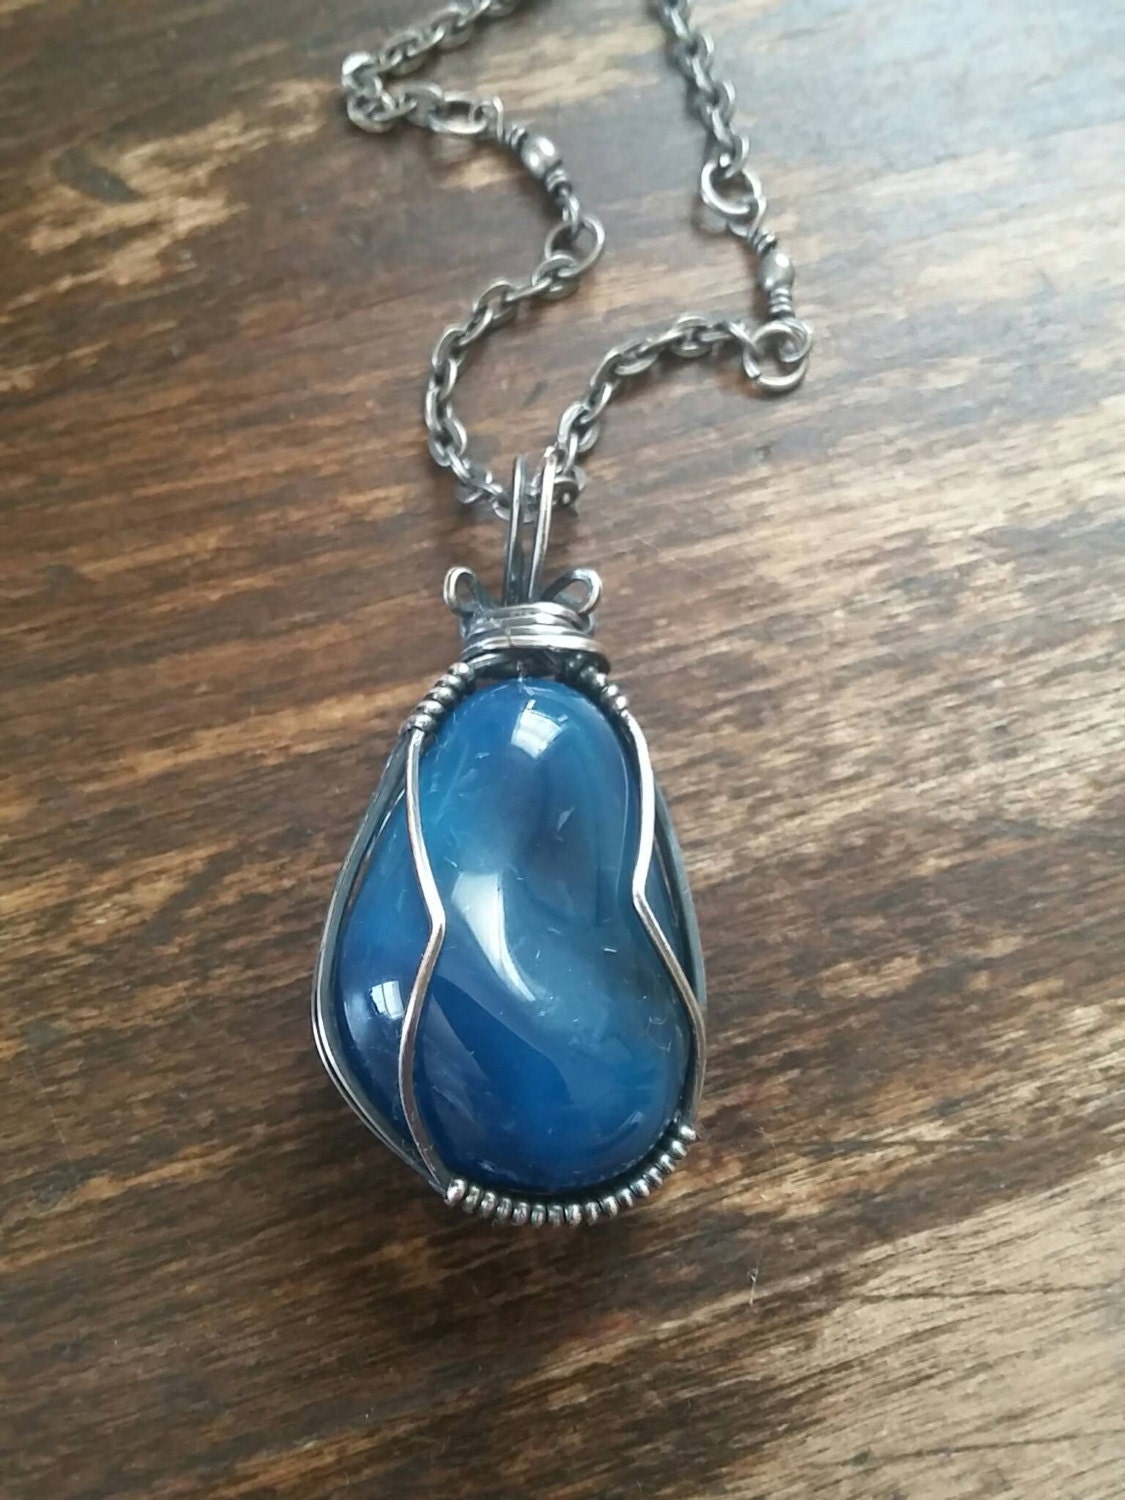 Large Blue Onyx pendant with a antique patina by Harmanacks